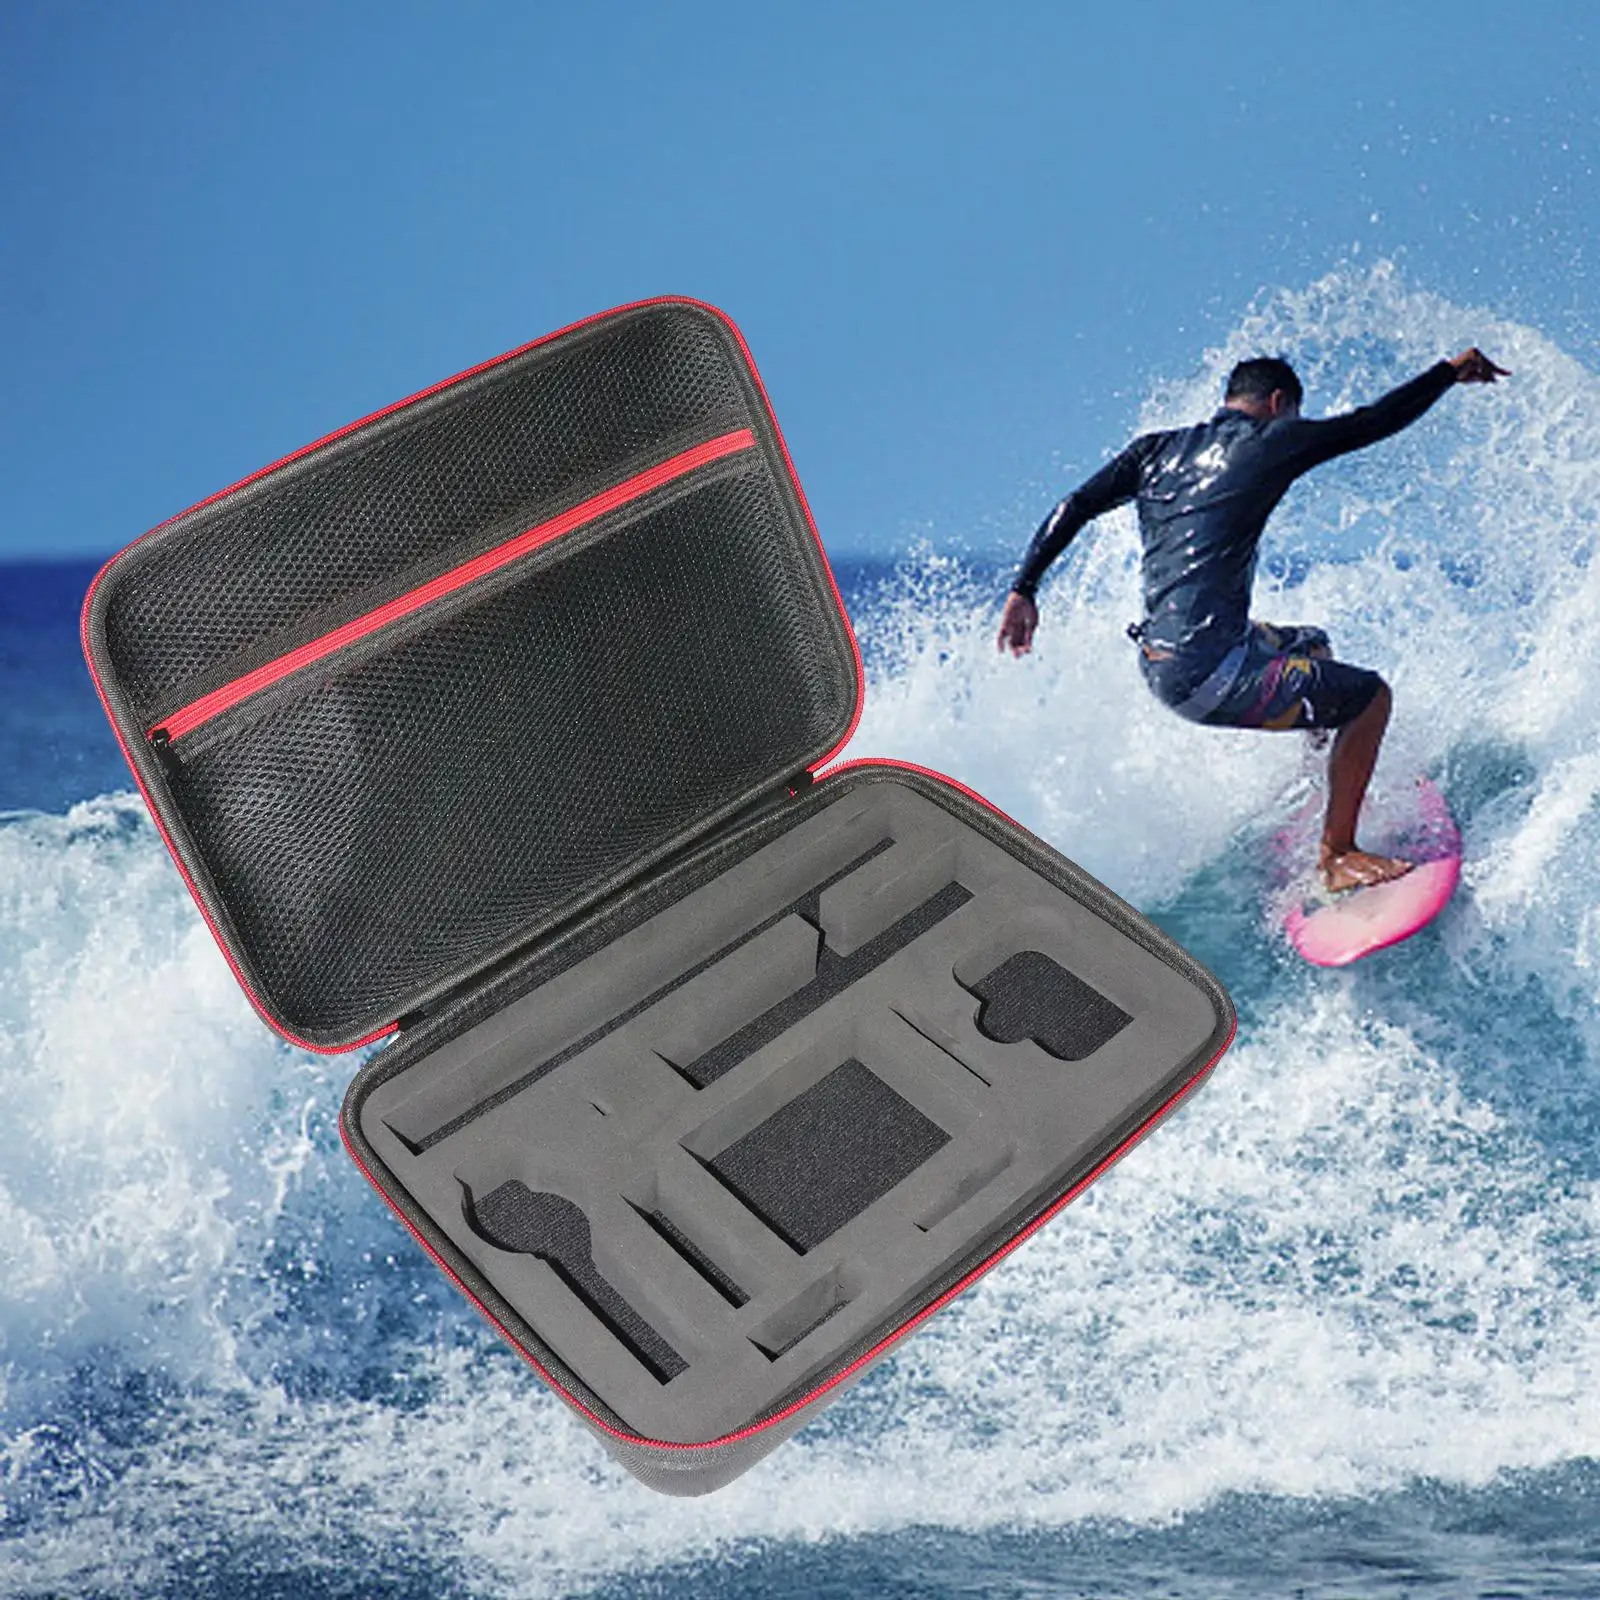 Portable Carrying Case Storage Holder Scratchproof for x3 Action Camera